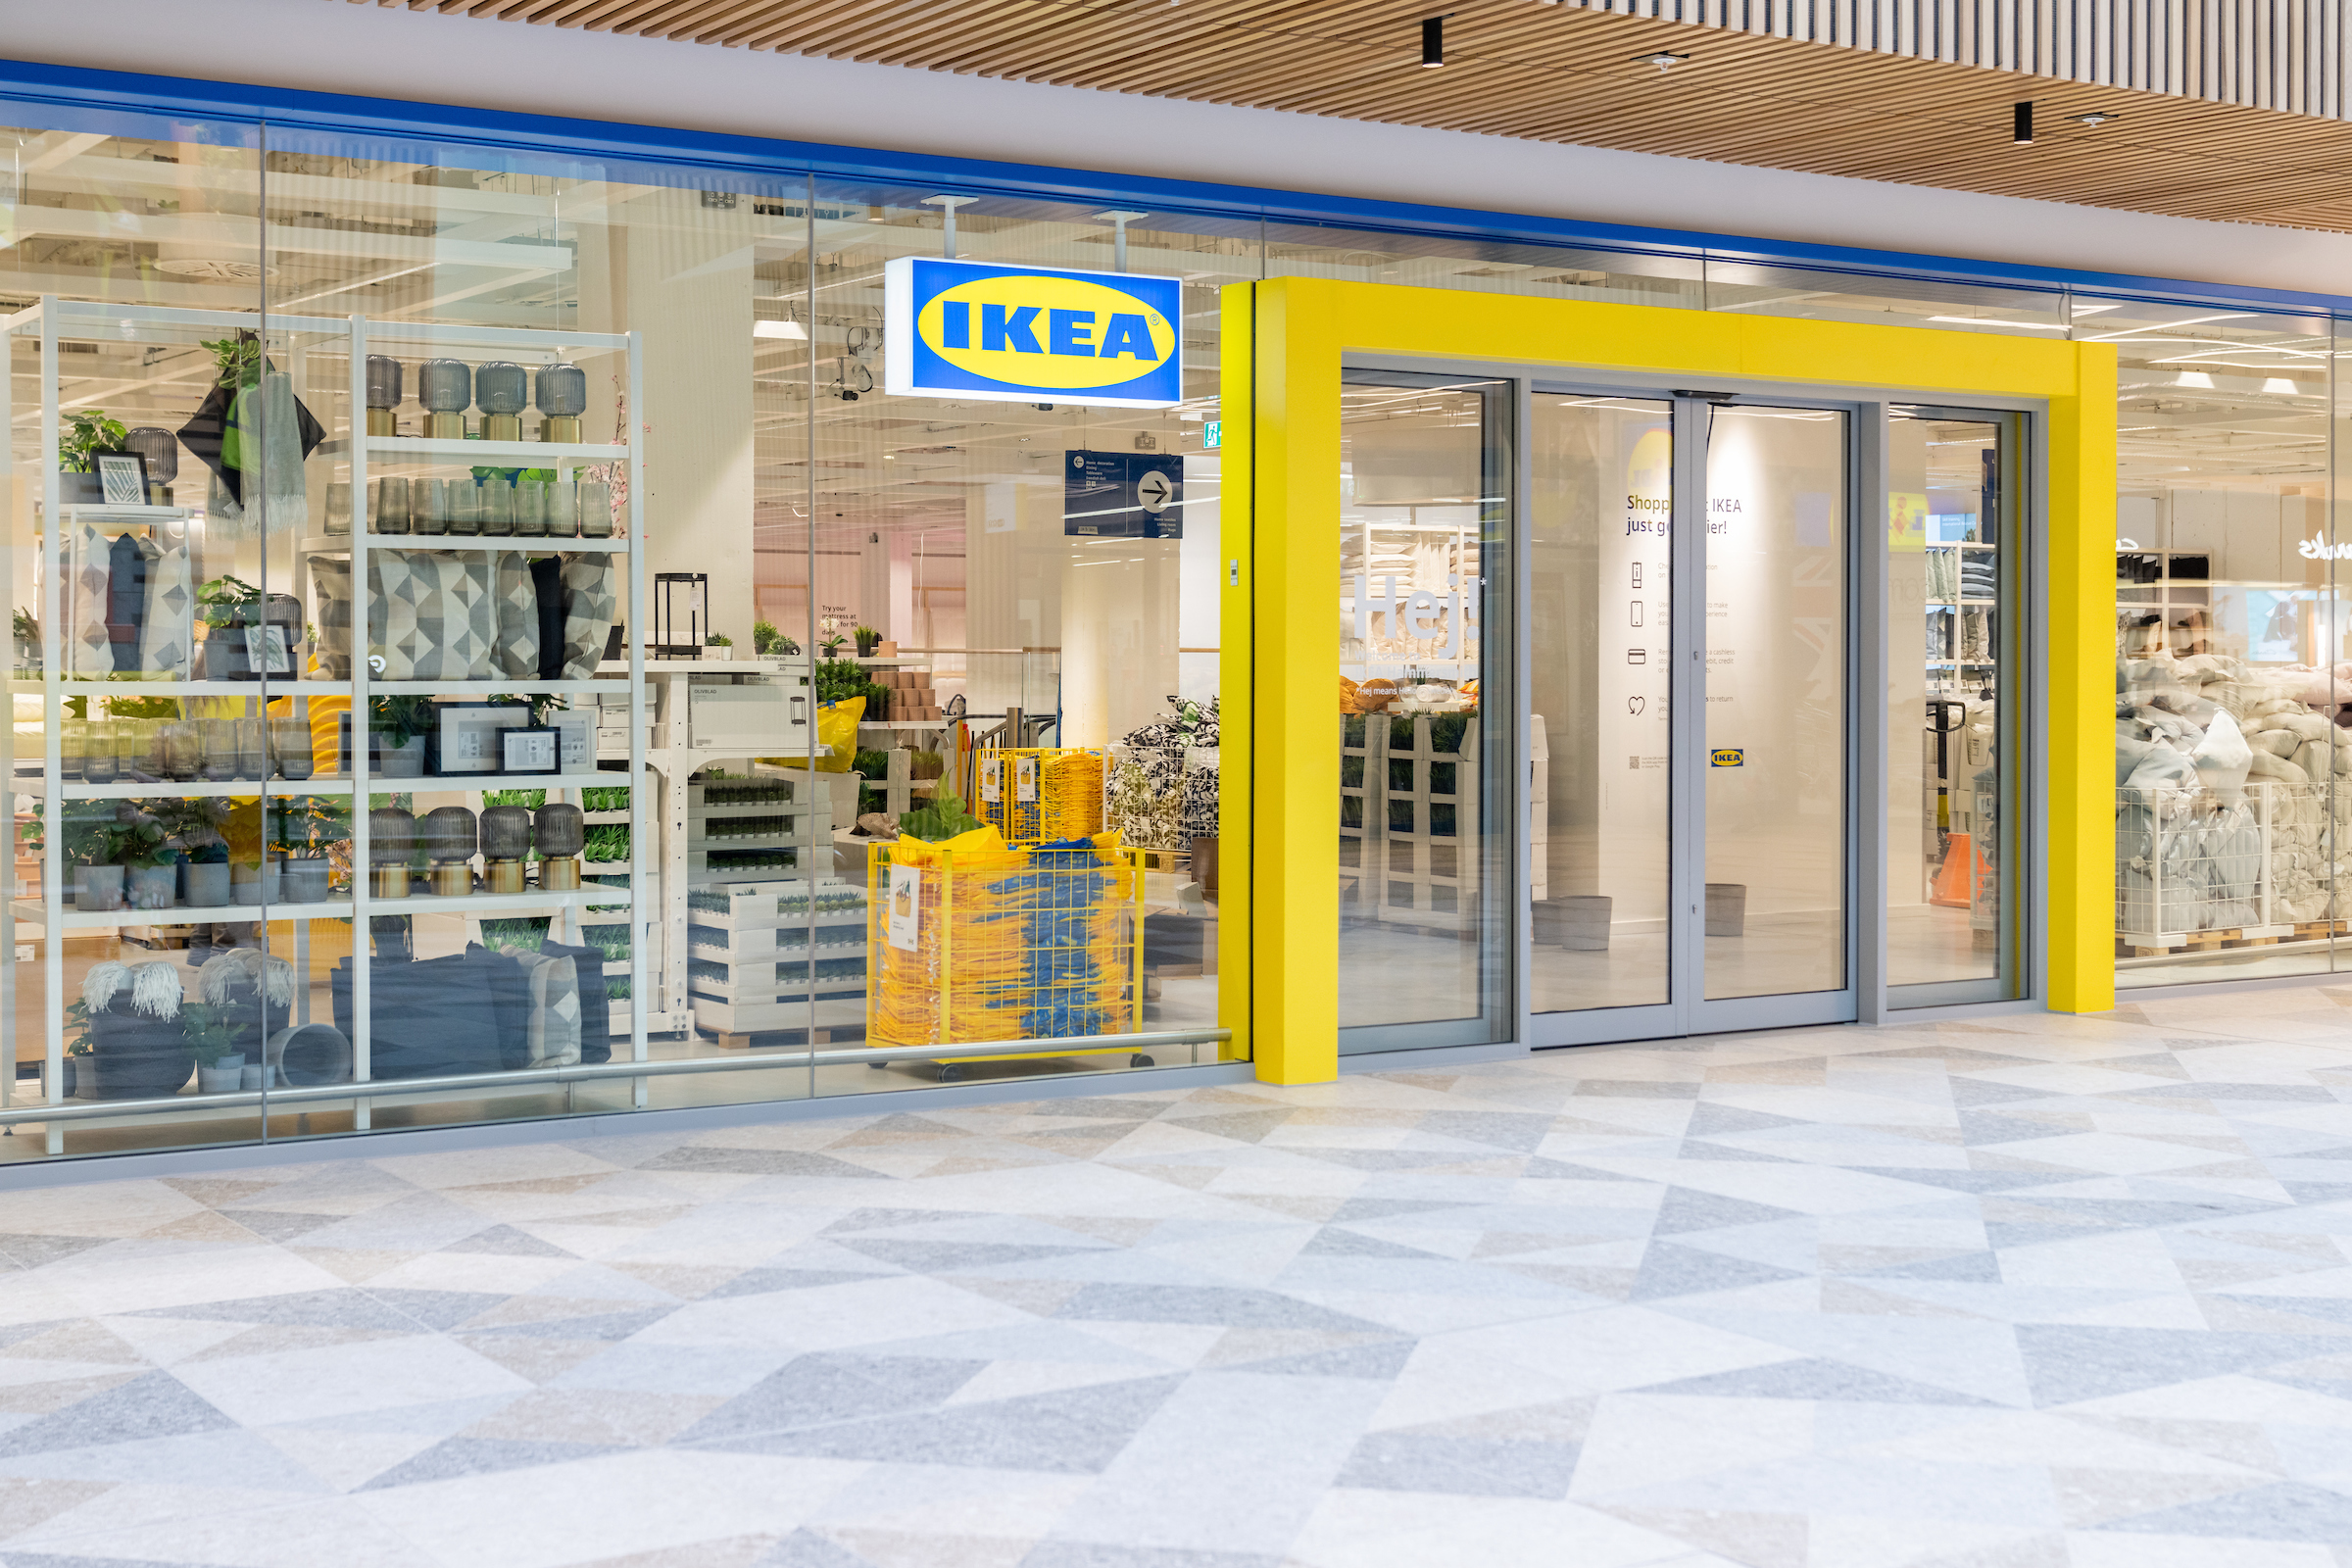 Ikea's first small format store in Hammersmith